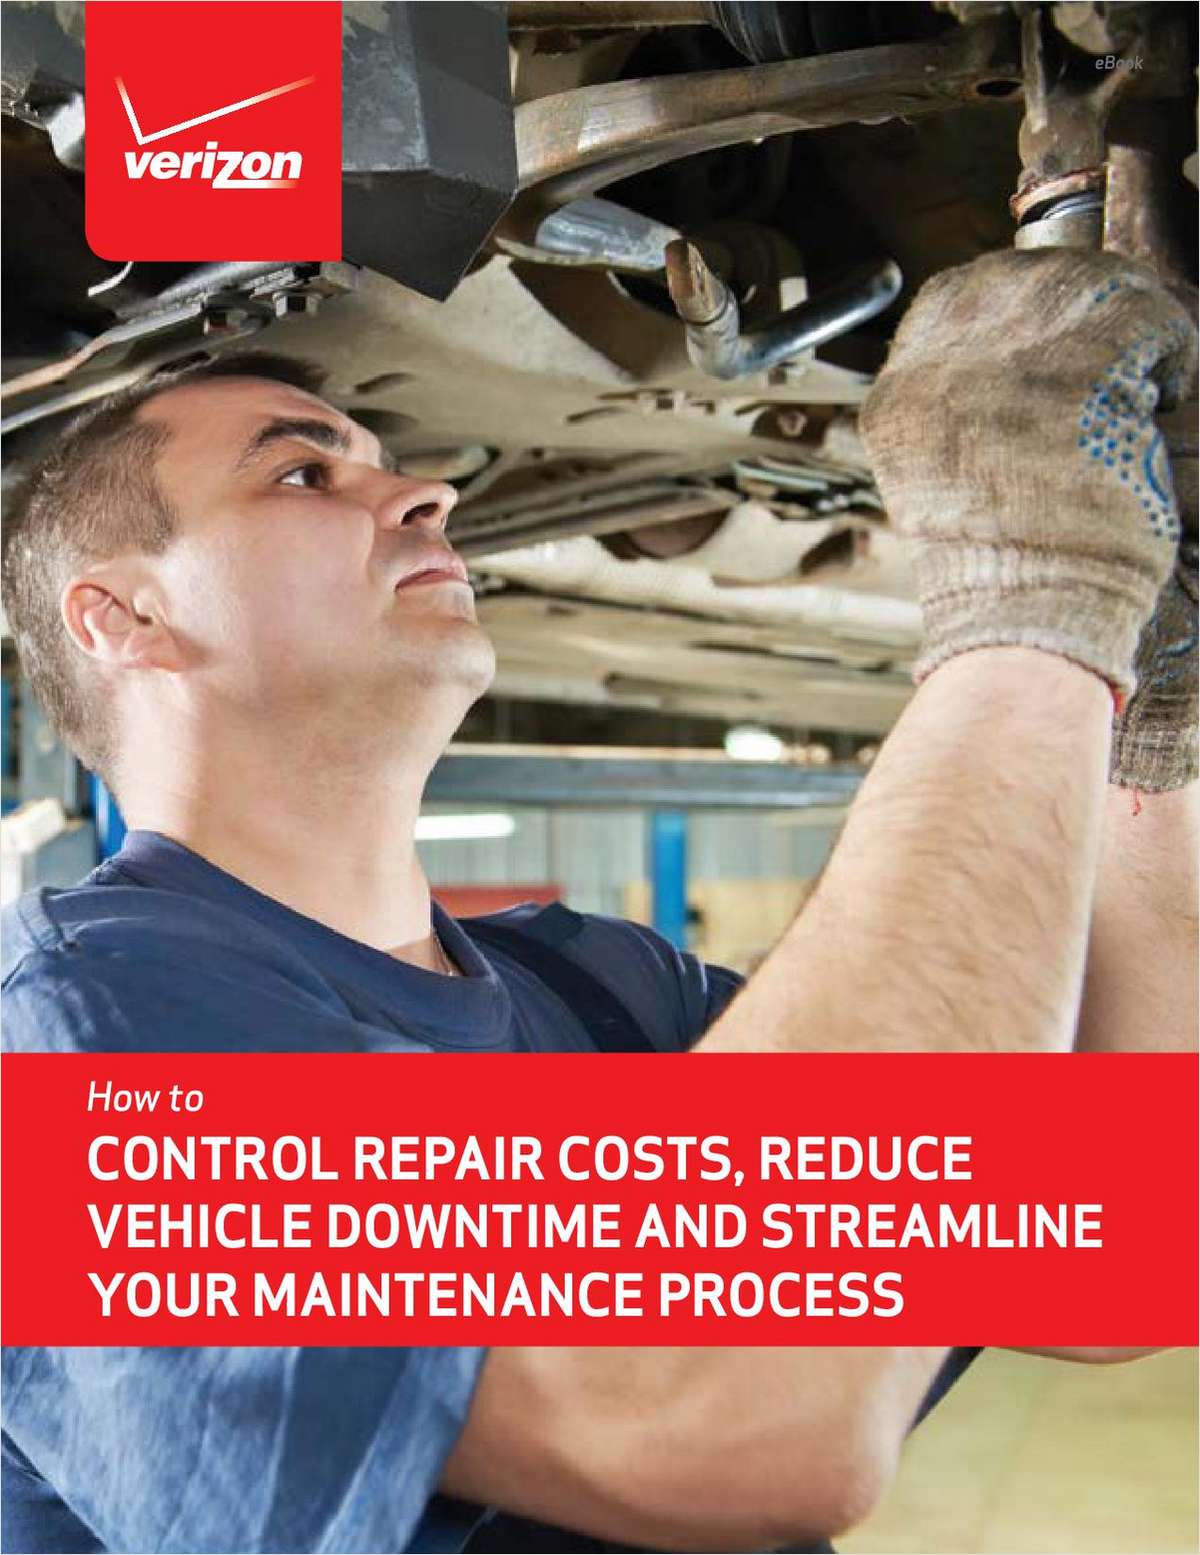 Streamline Your Maintenance Process for Reduced Costs and Downtime